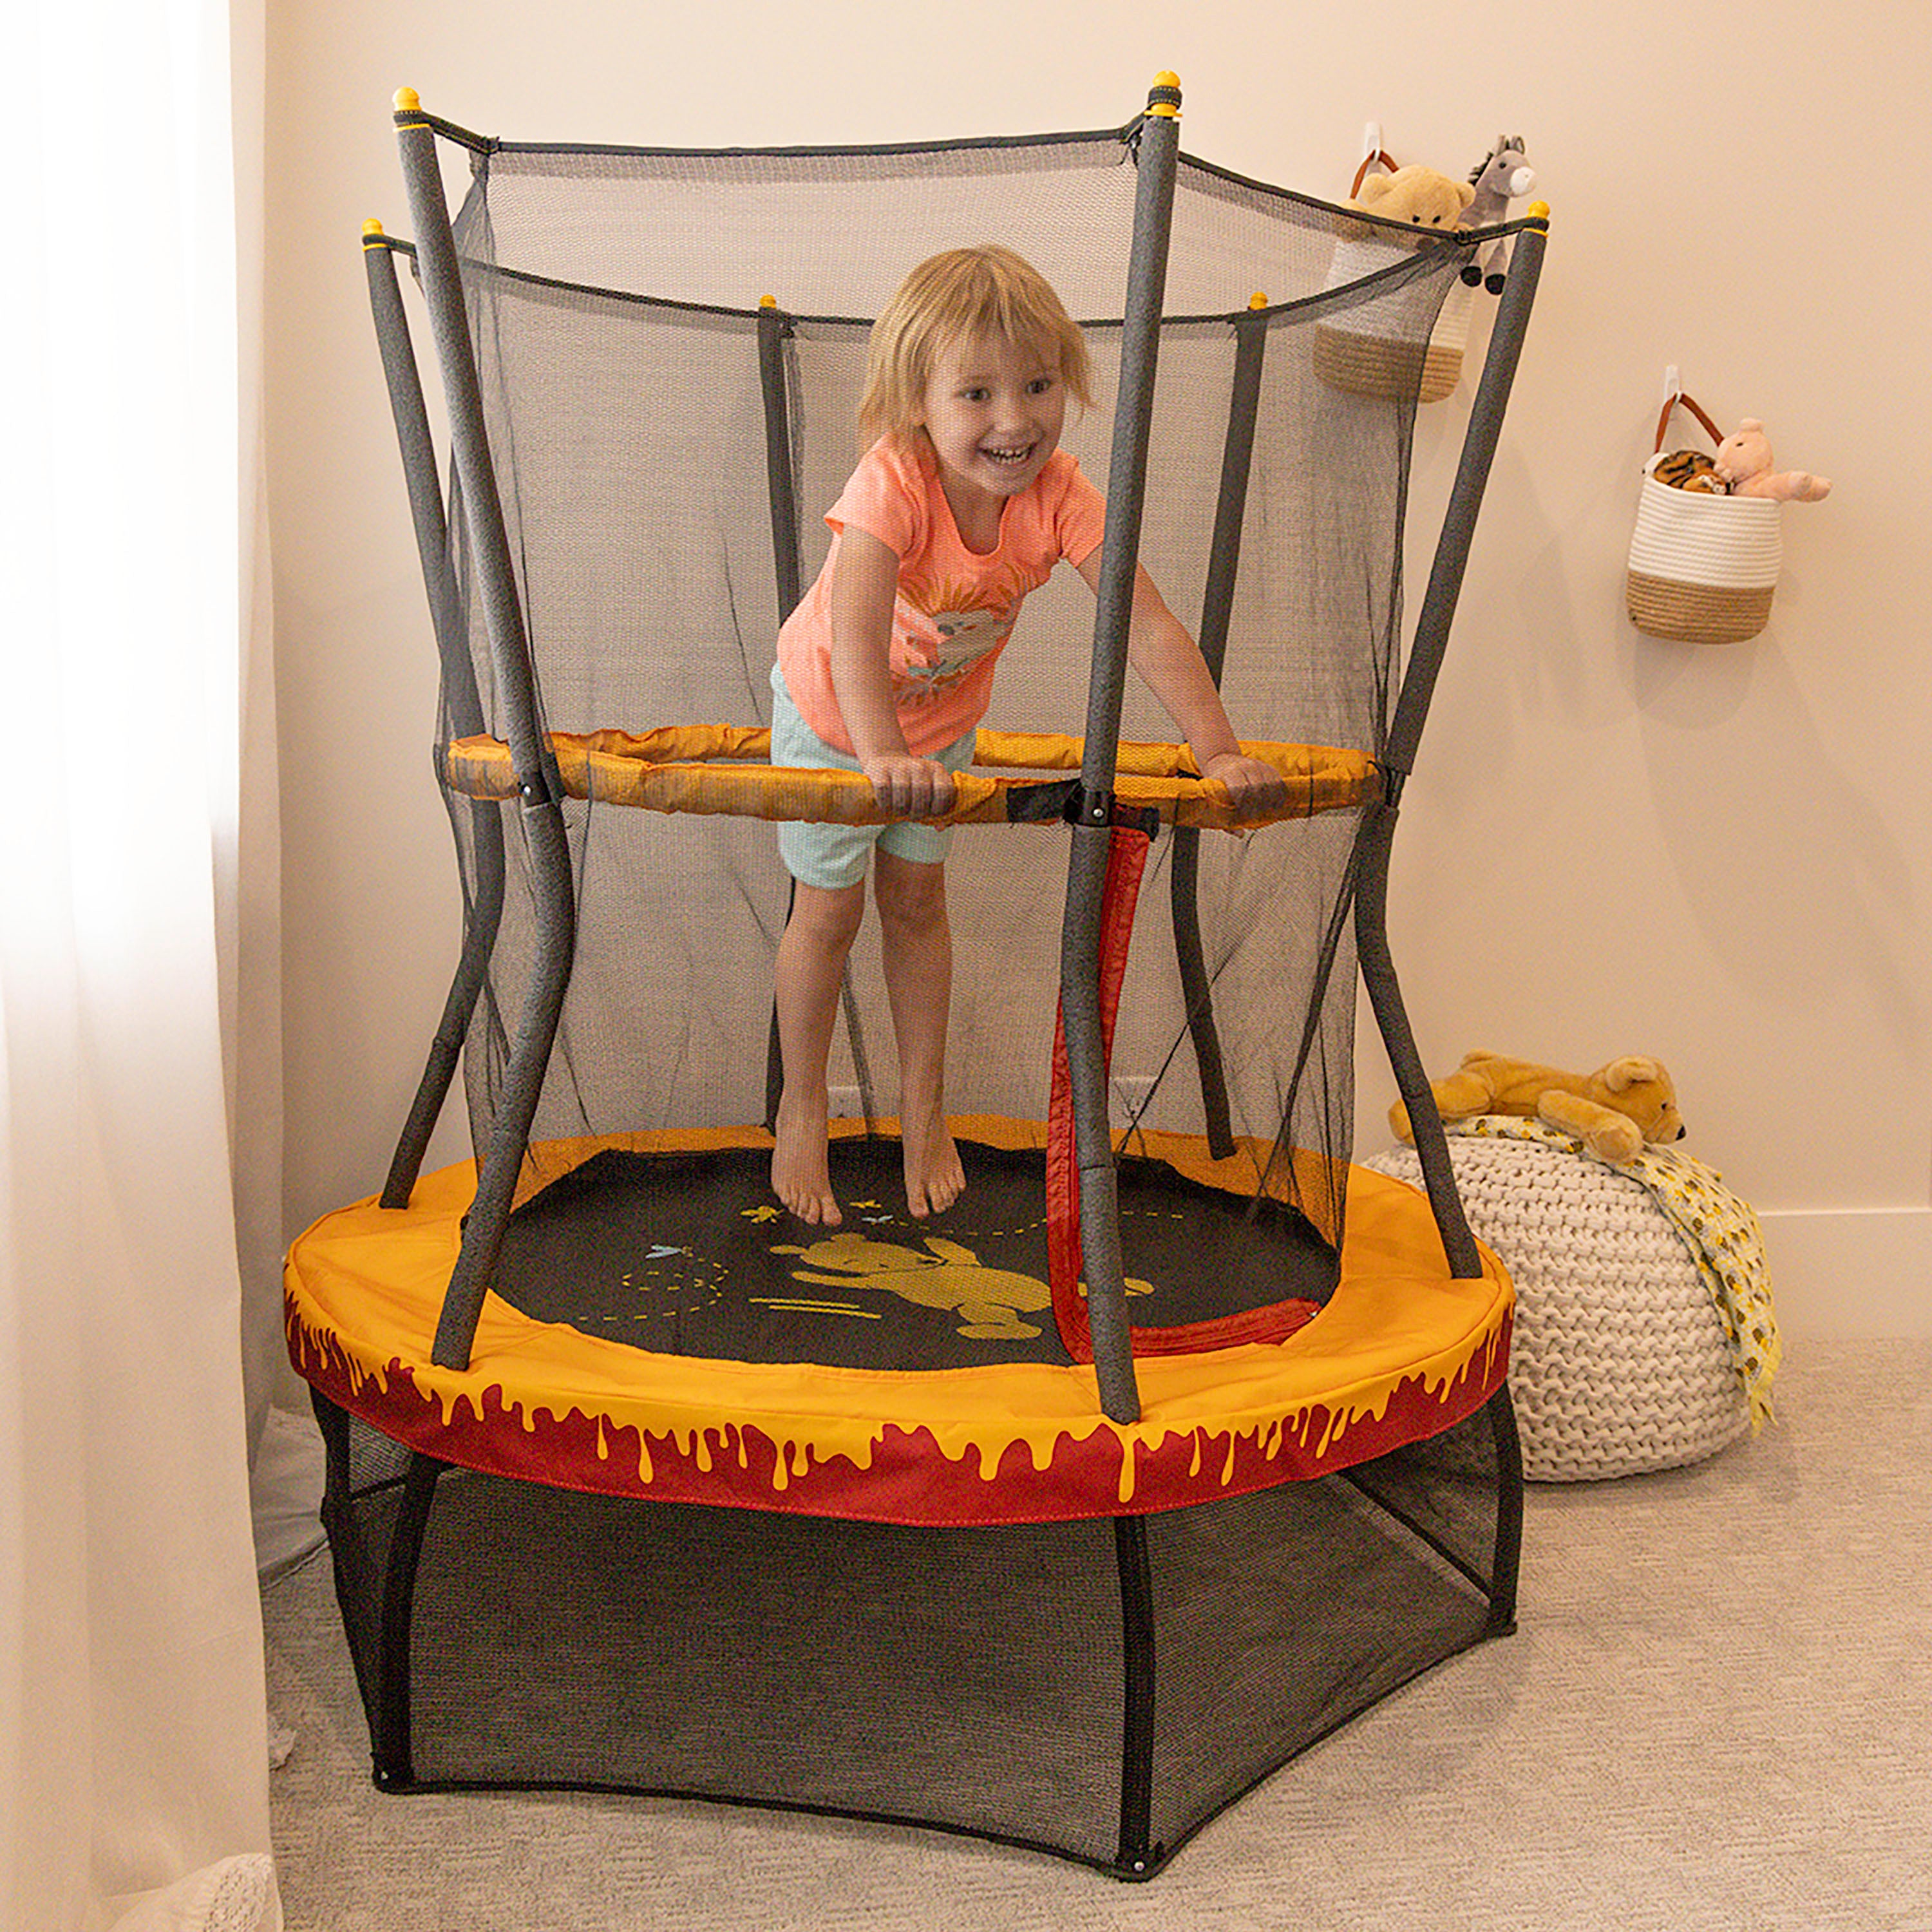 A young girl jumps on the 48” Winnie the Pooh toddler trampoline. 